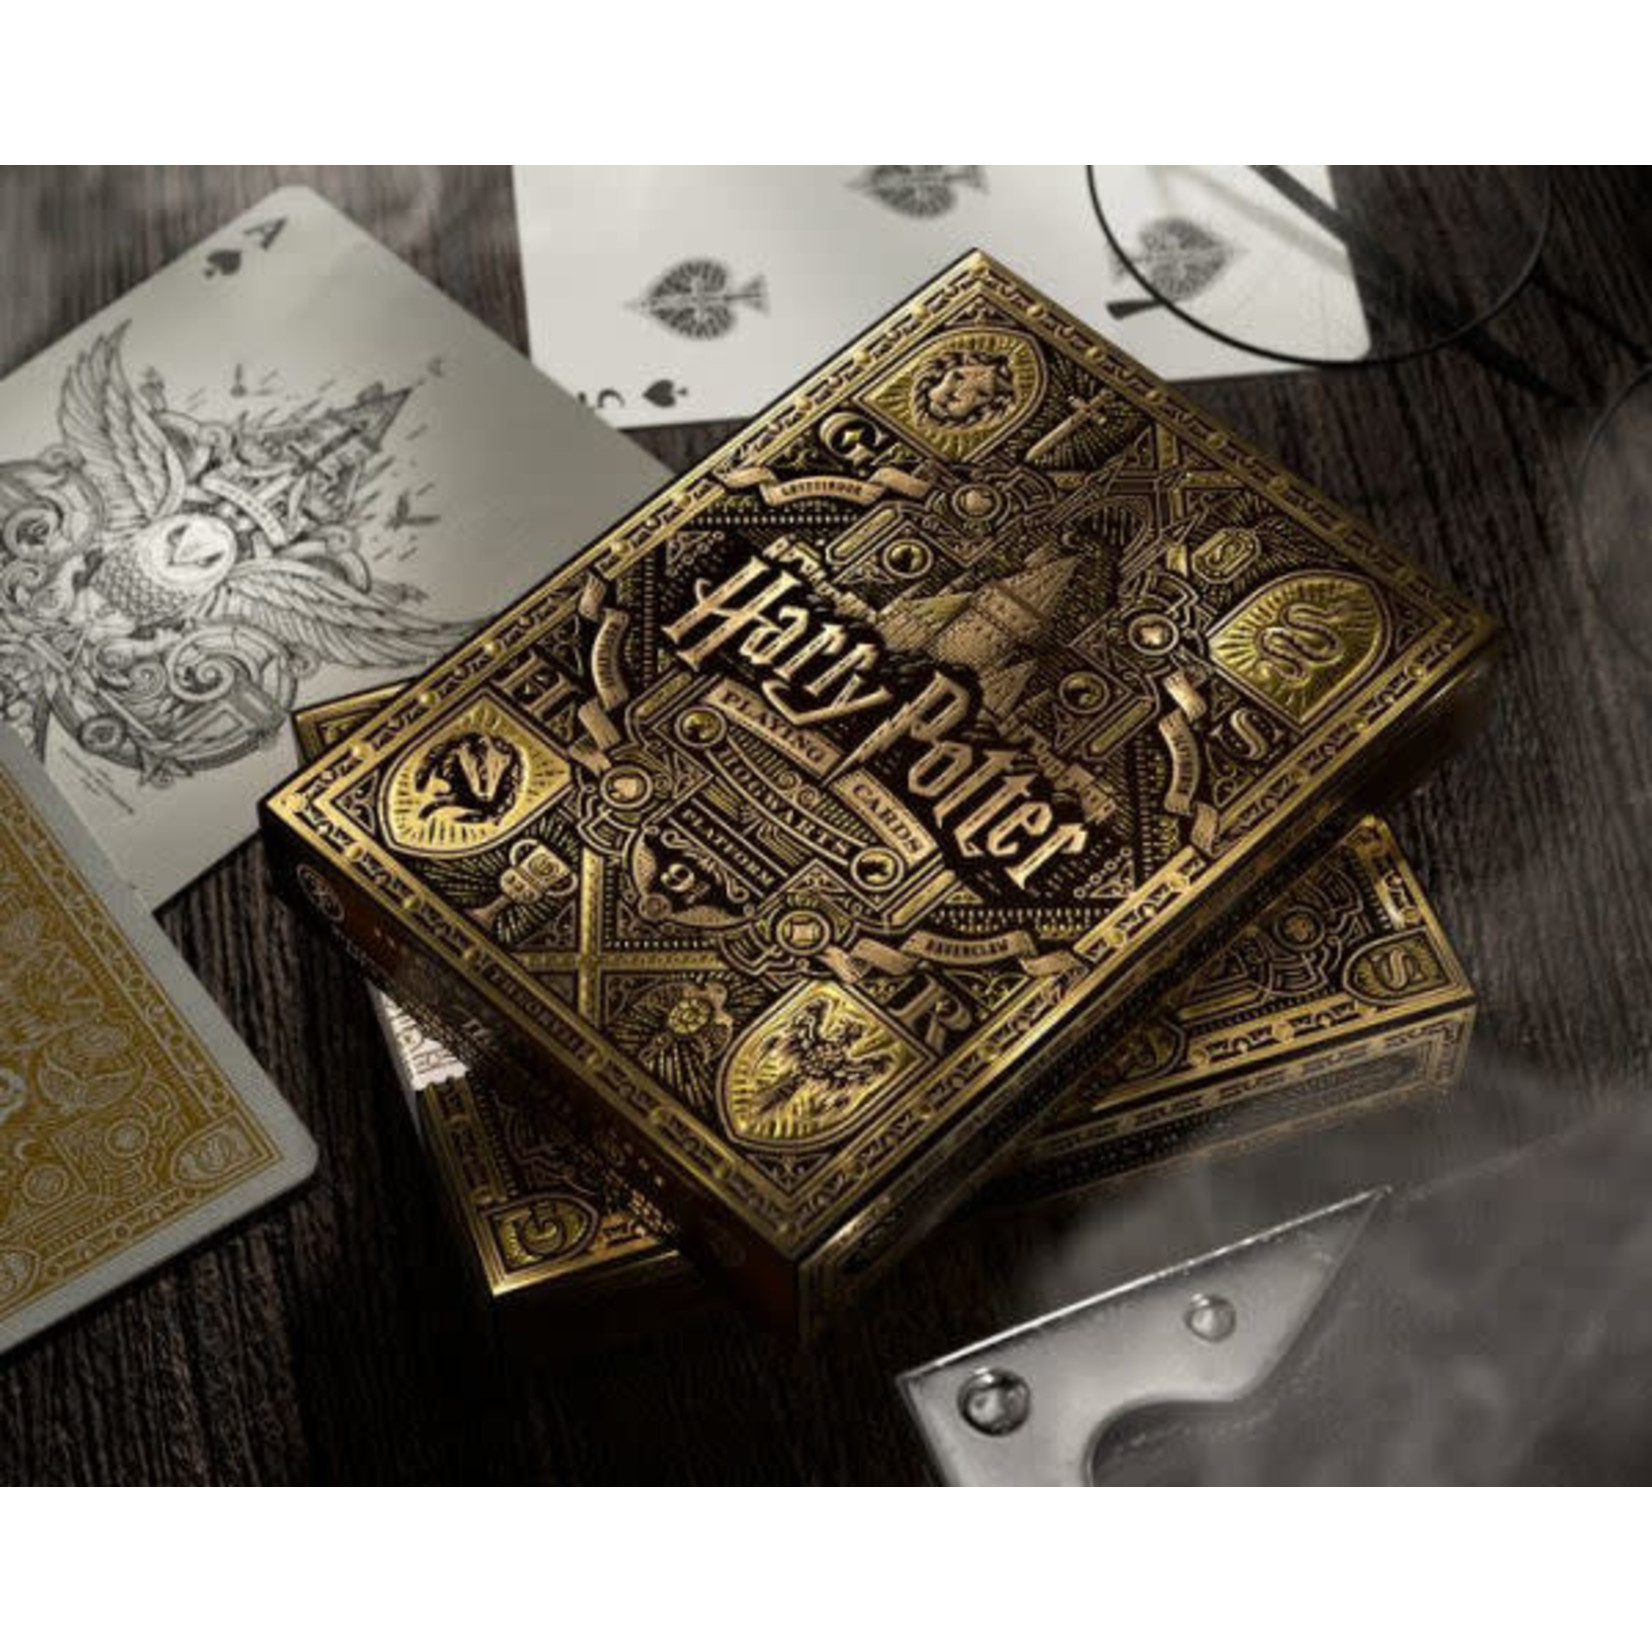 Theory11 Harry Potter Playing Cards